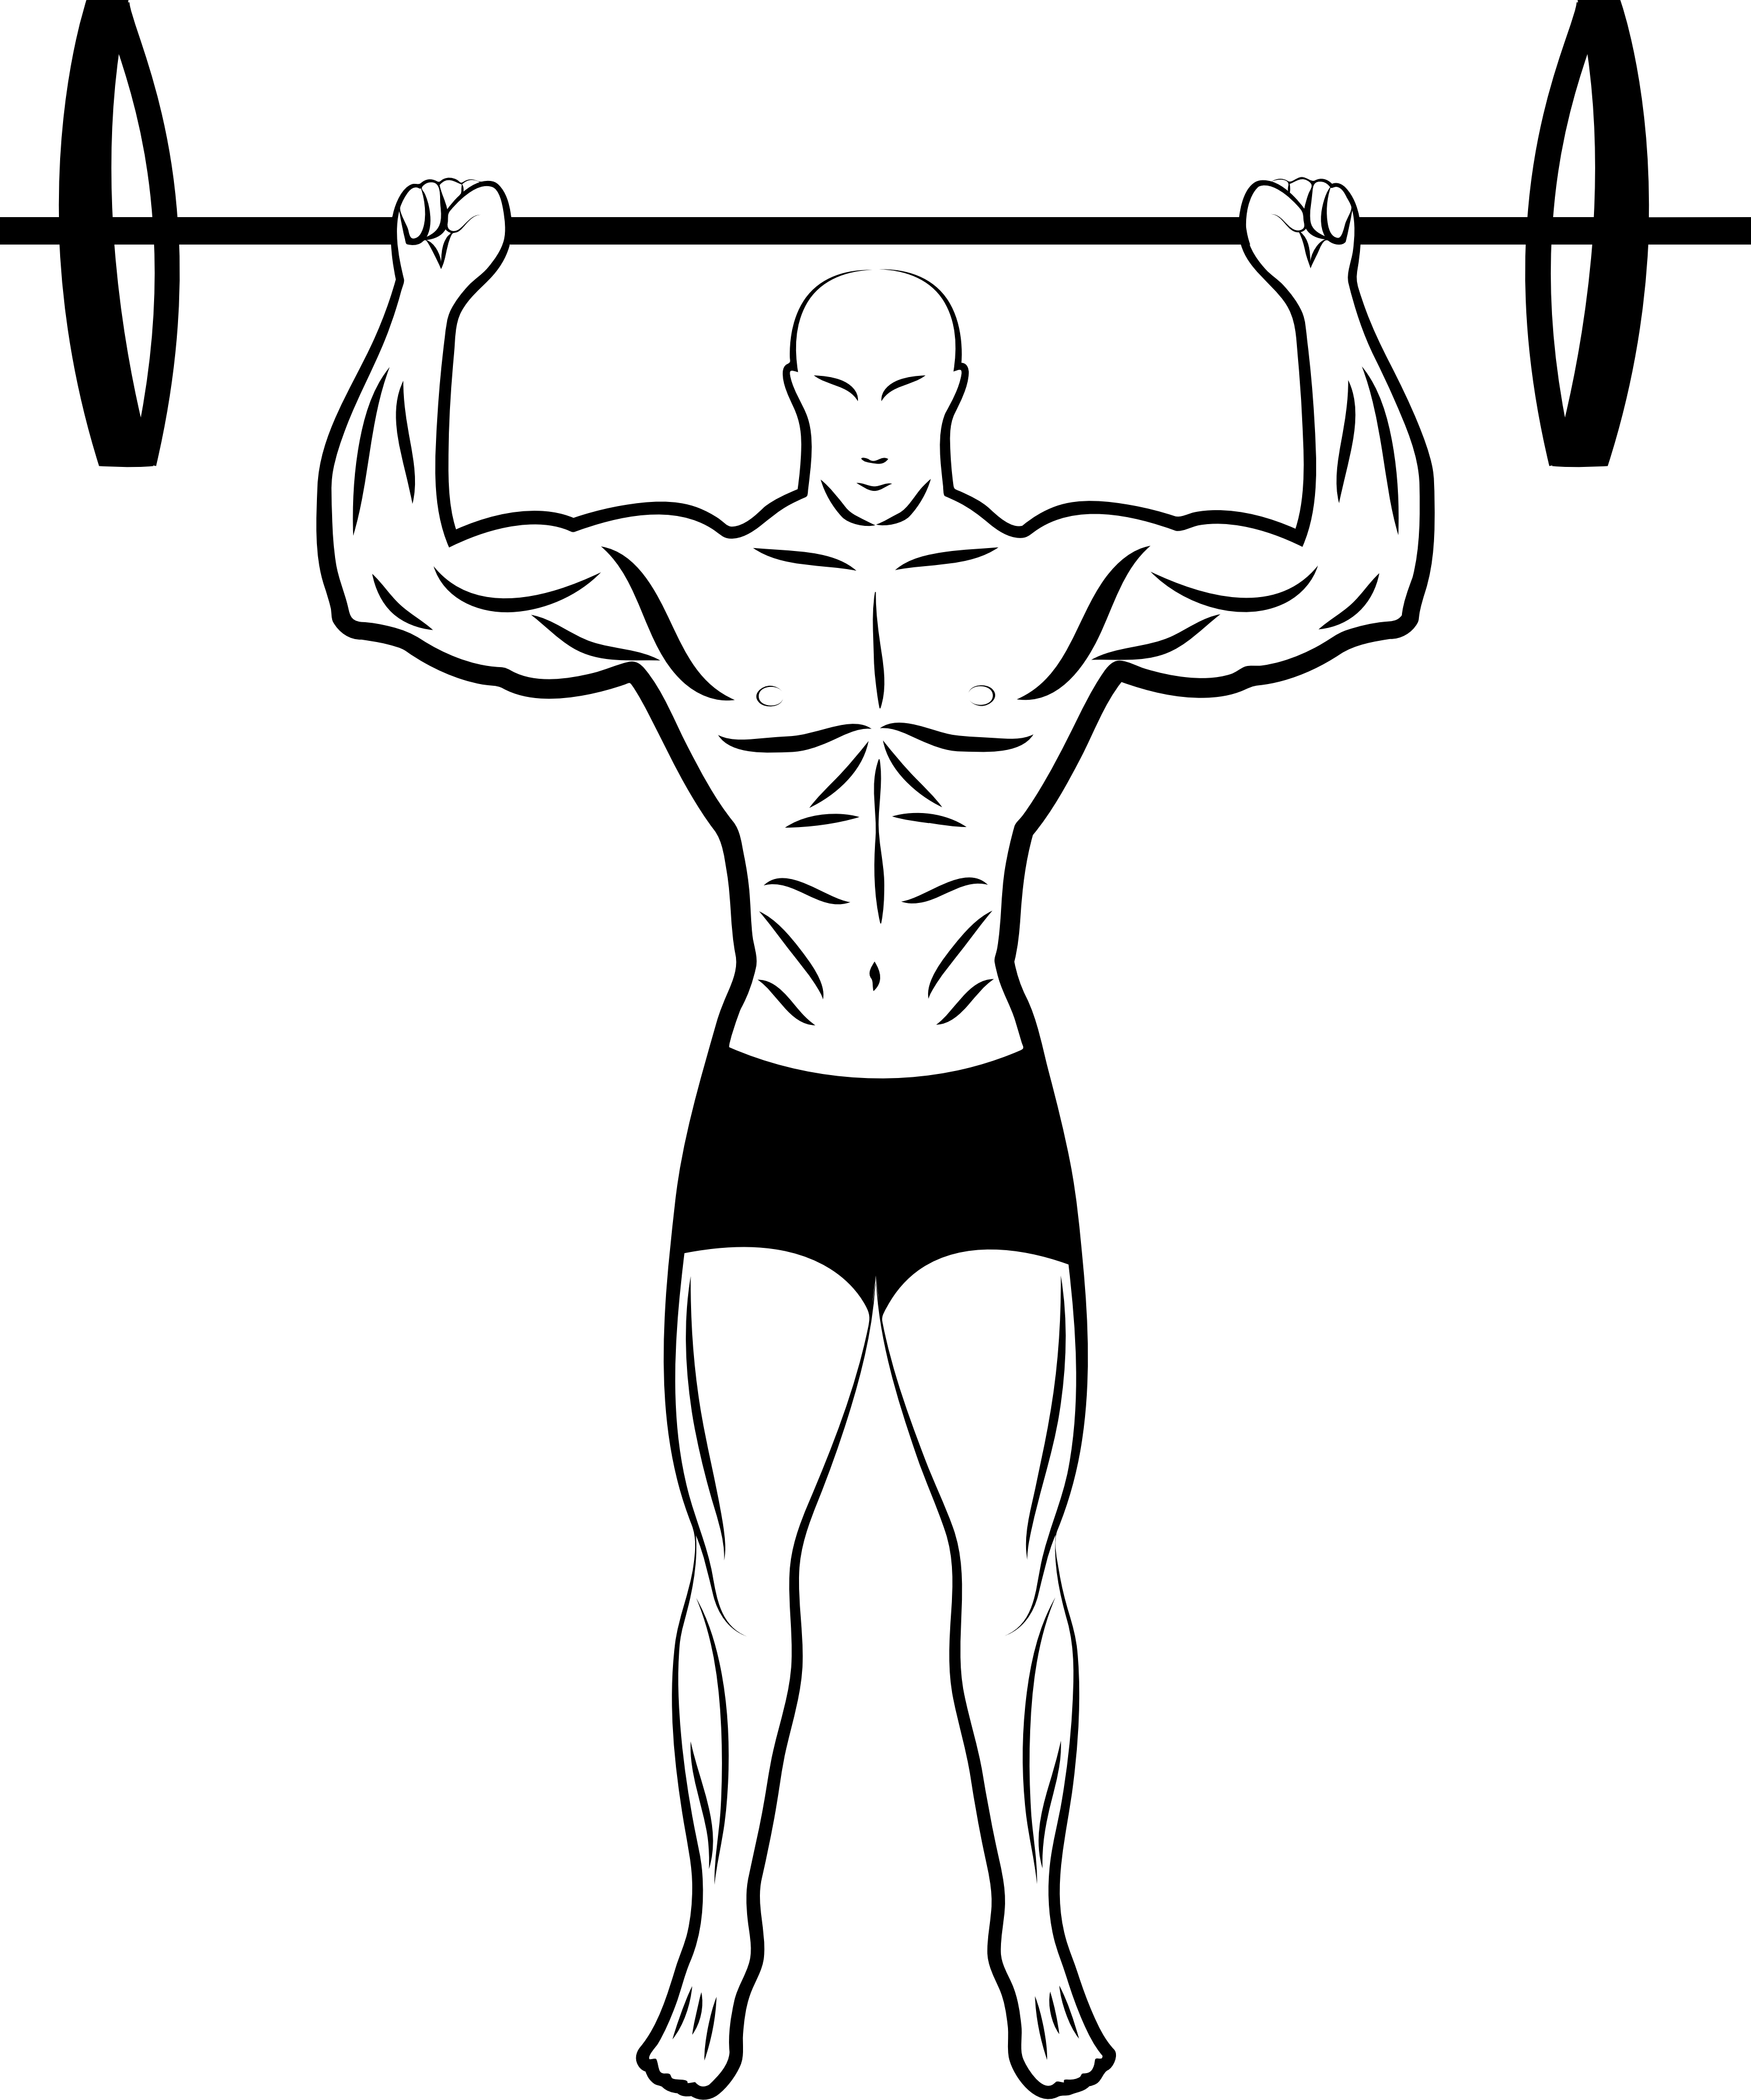 Arms clipart fitness, Arms fitness Transparent FREE for